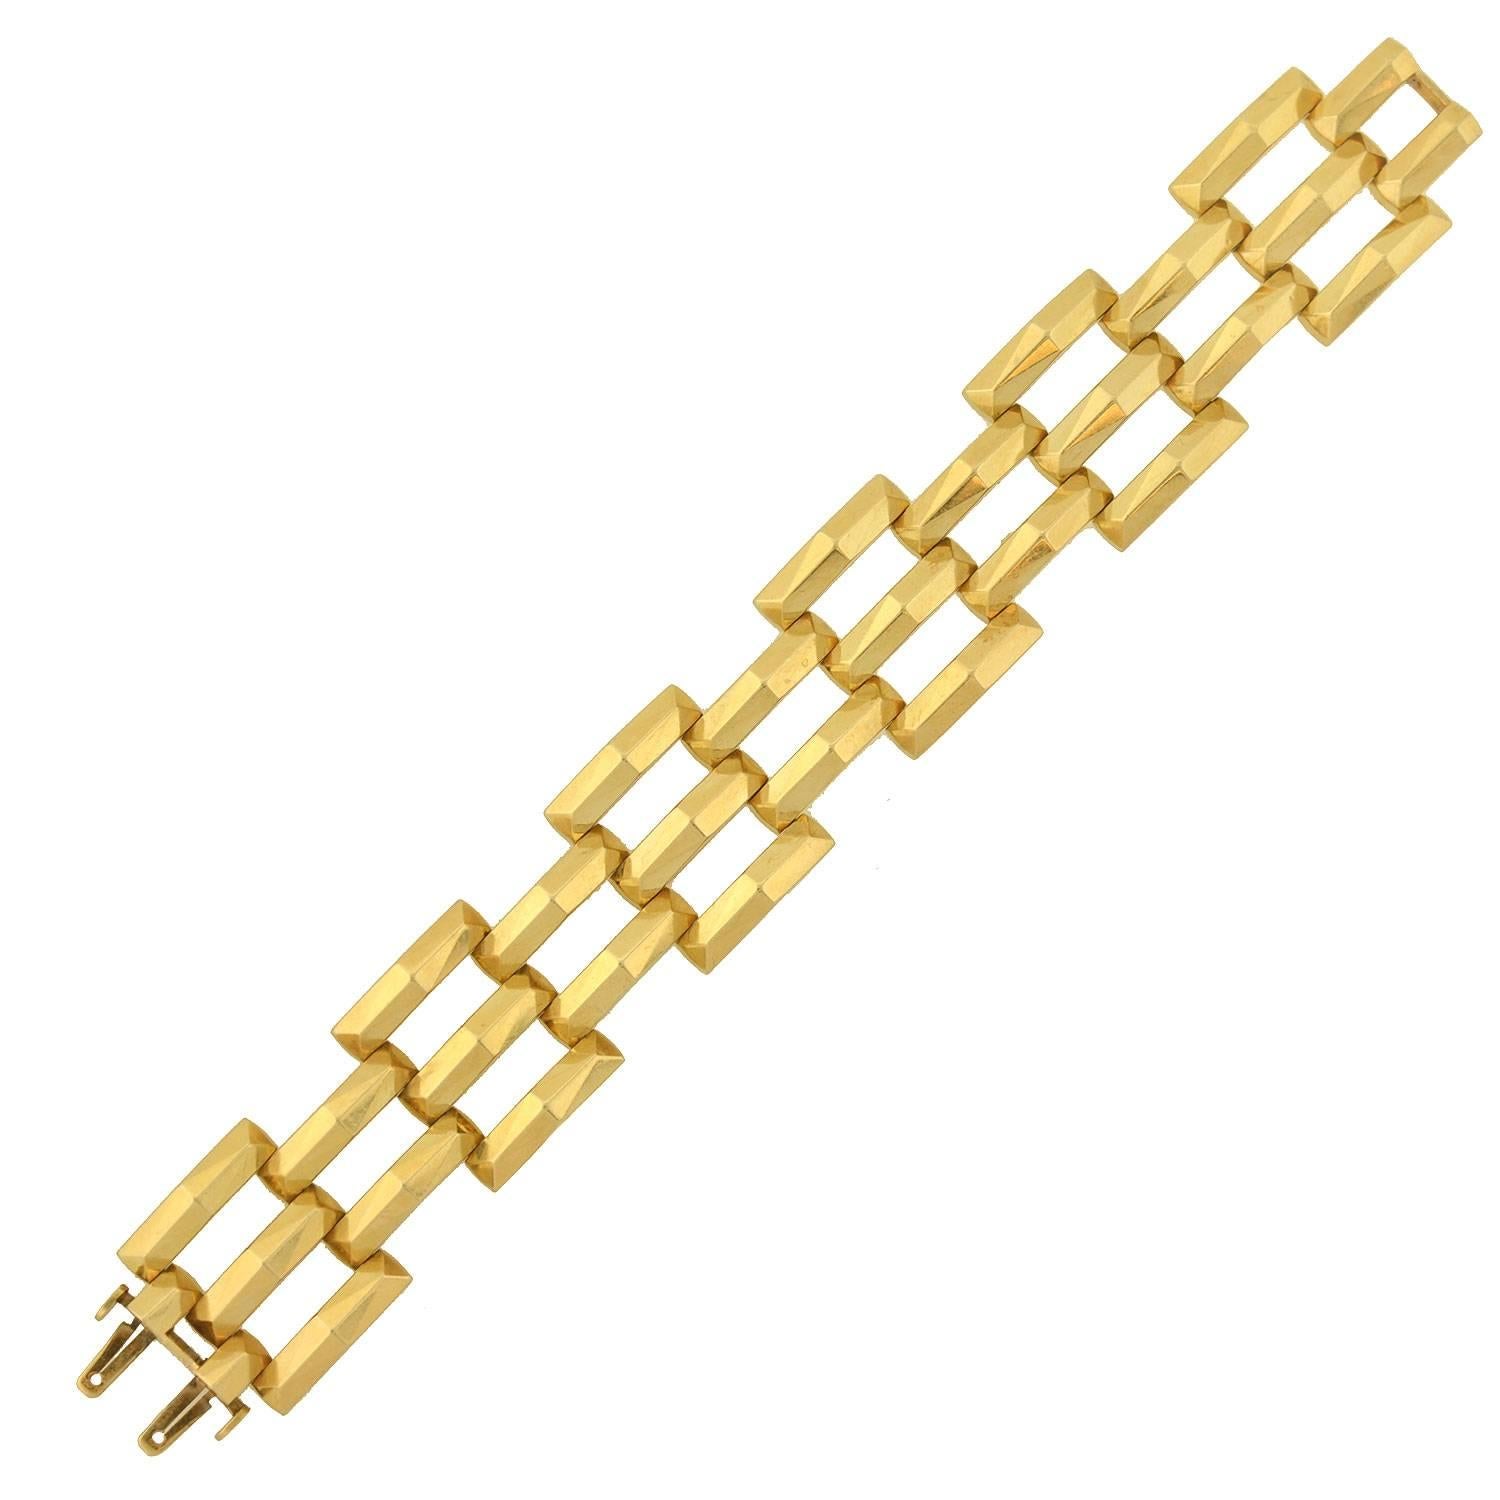 This fabulous vintage bracelet from the 1950s is a signed piece by Tiffany & Co! Made of 14kt gold, the bracelet has a stylish gate link design. Three rows of intersecting links are hinged together with hidden pins, creating the illusion of stacked